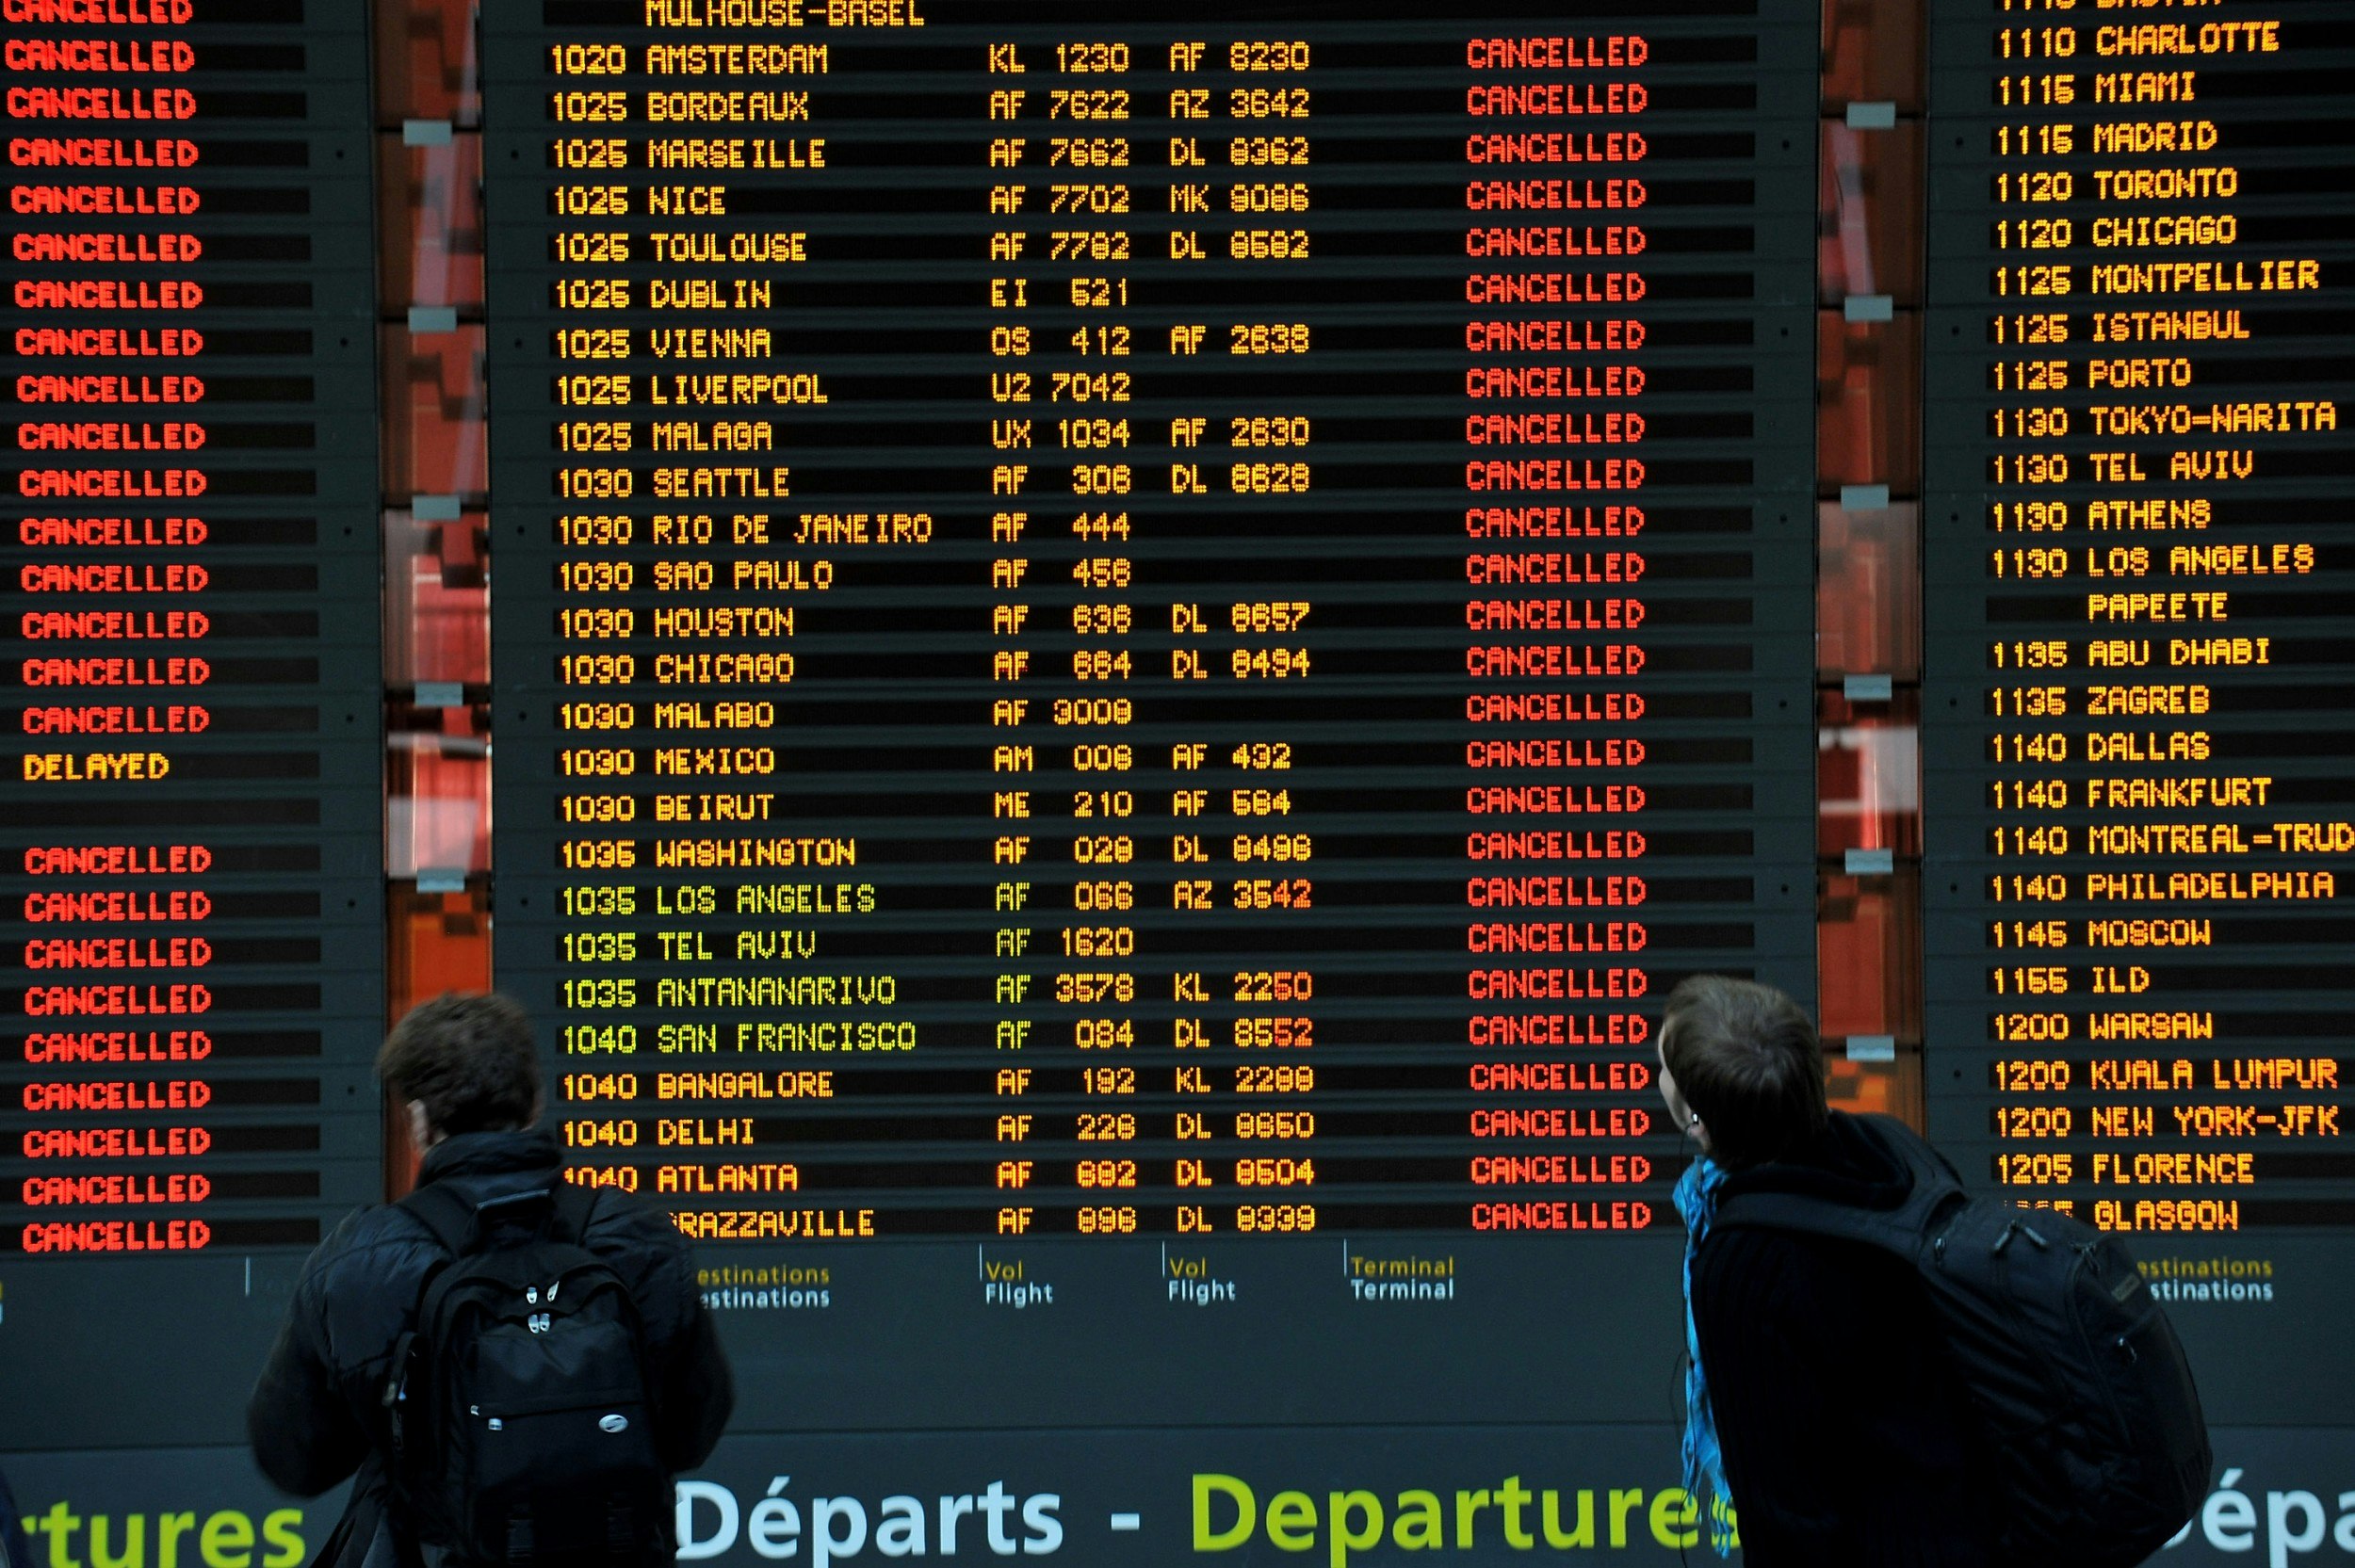 Passengers look at a flight information board that indicate cancelled flights in a terminal at the Charles-de-Gaulle airpor